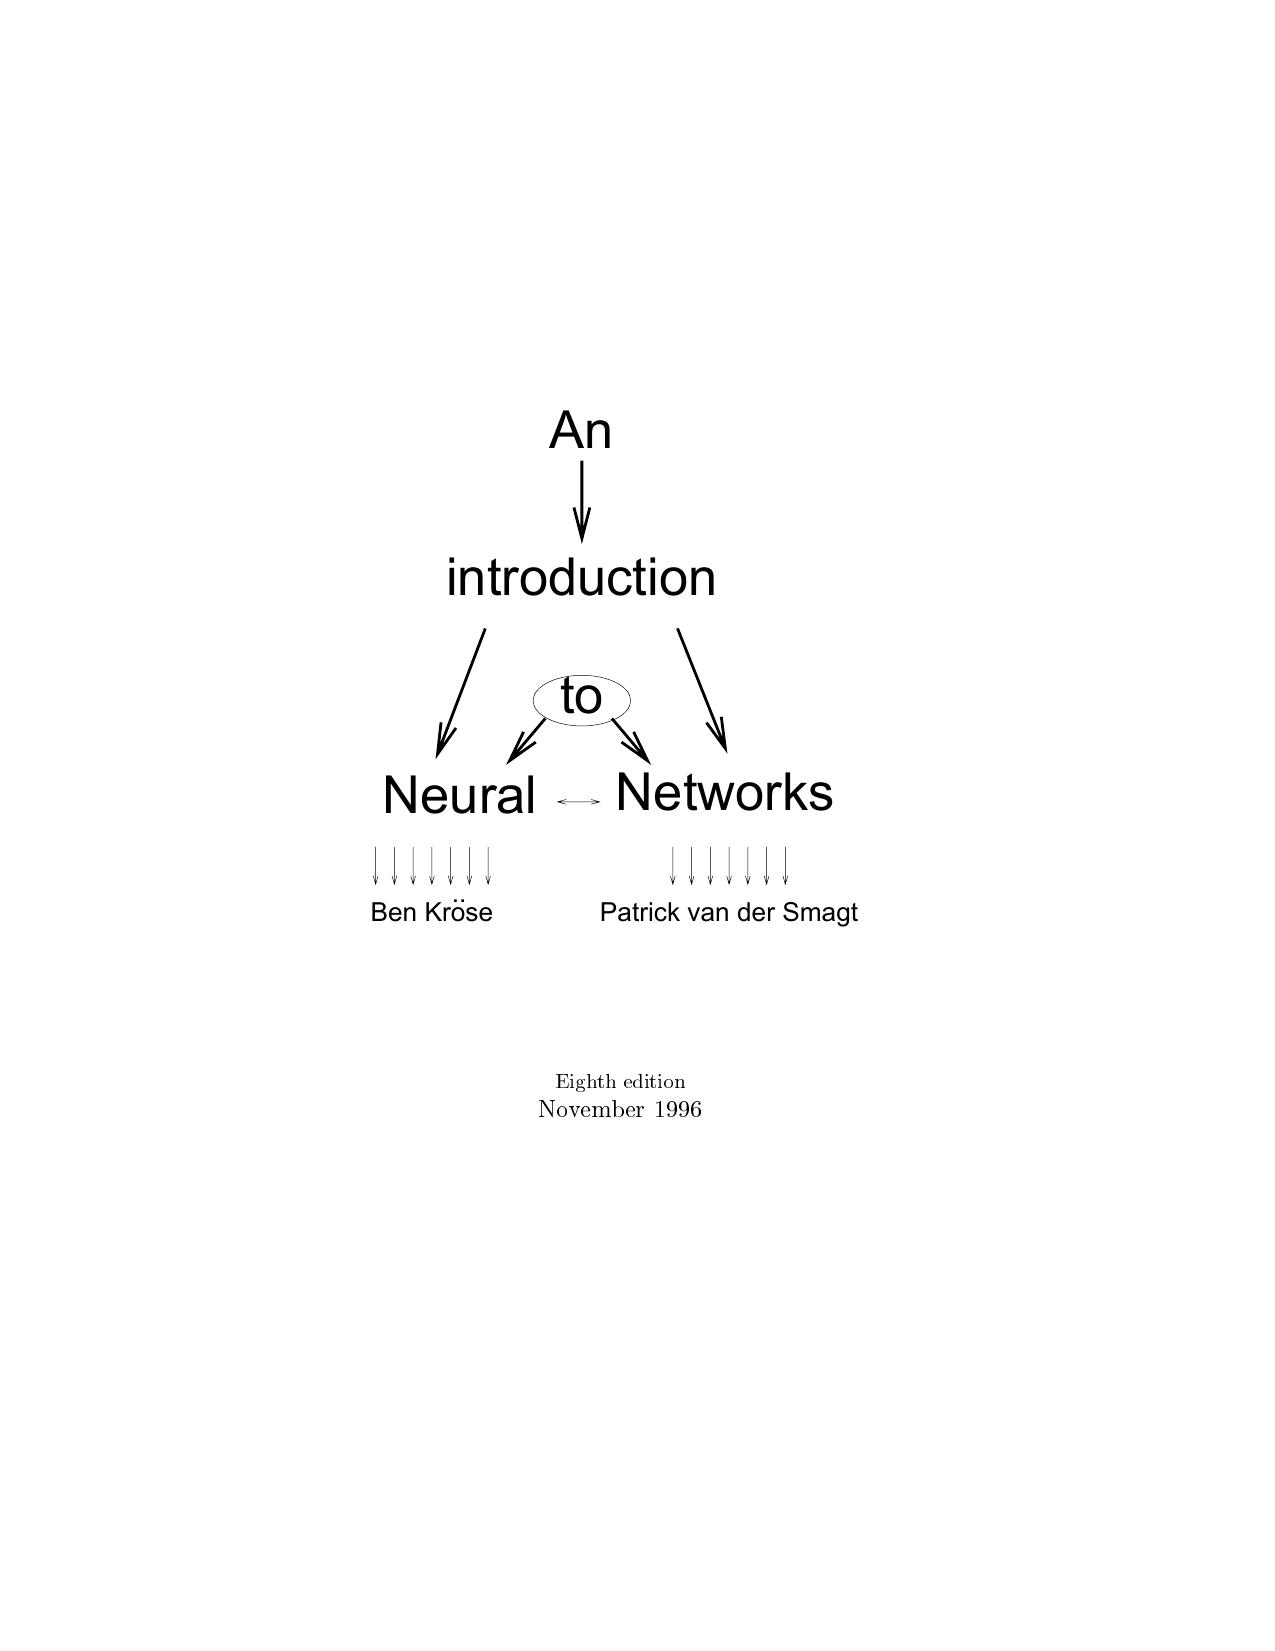 An Introduction to Neural Networks - Paper